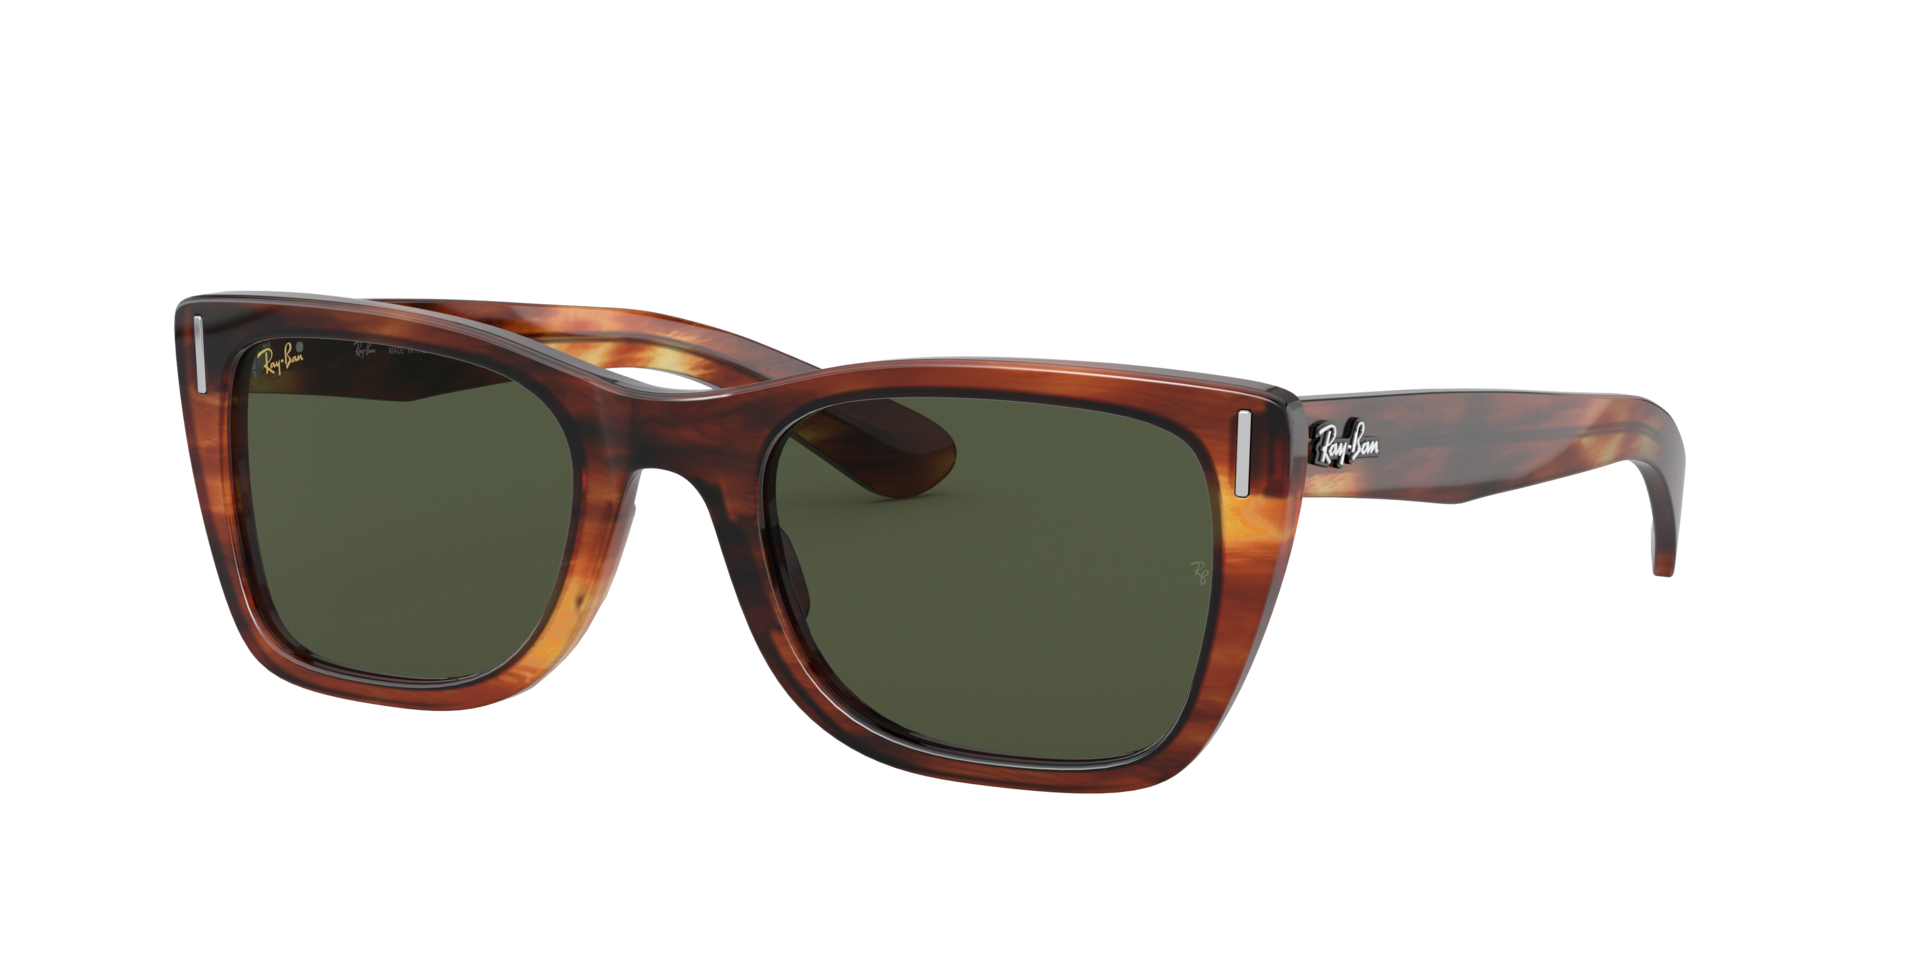 Ray-Ban RB2248 Caribbean Sunglasses for women